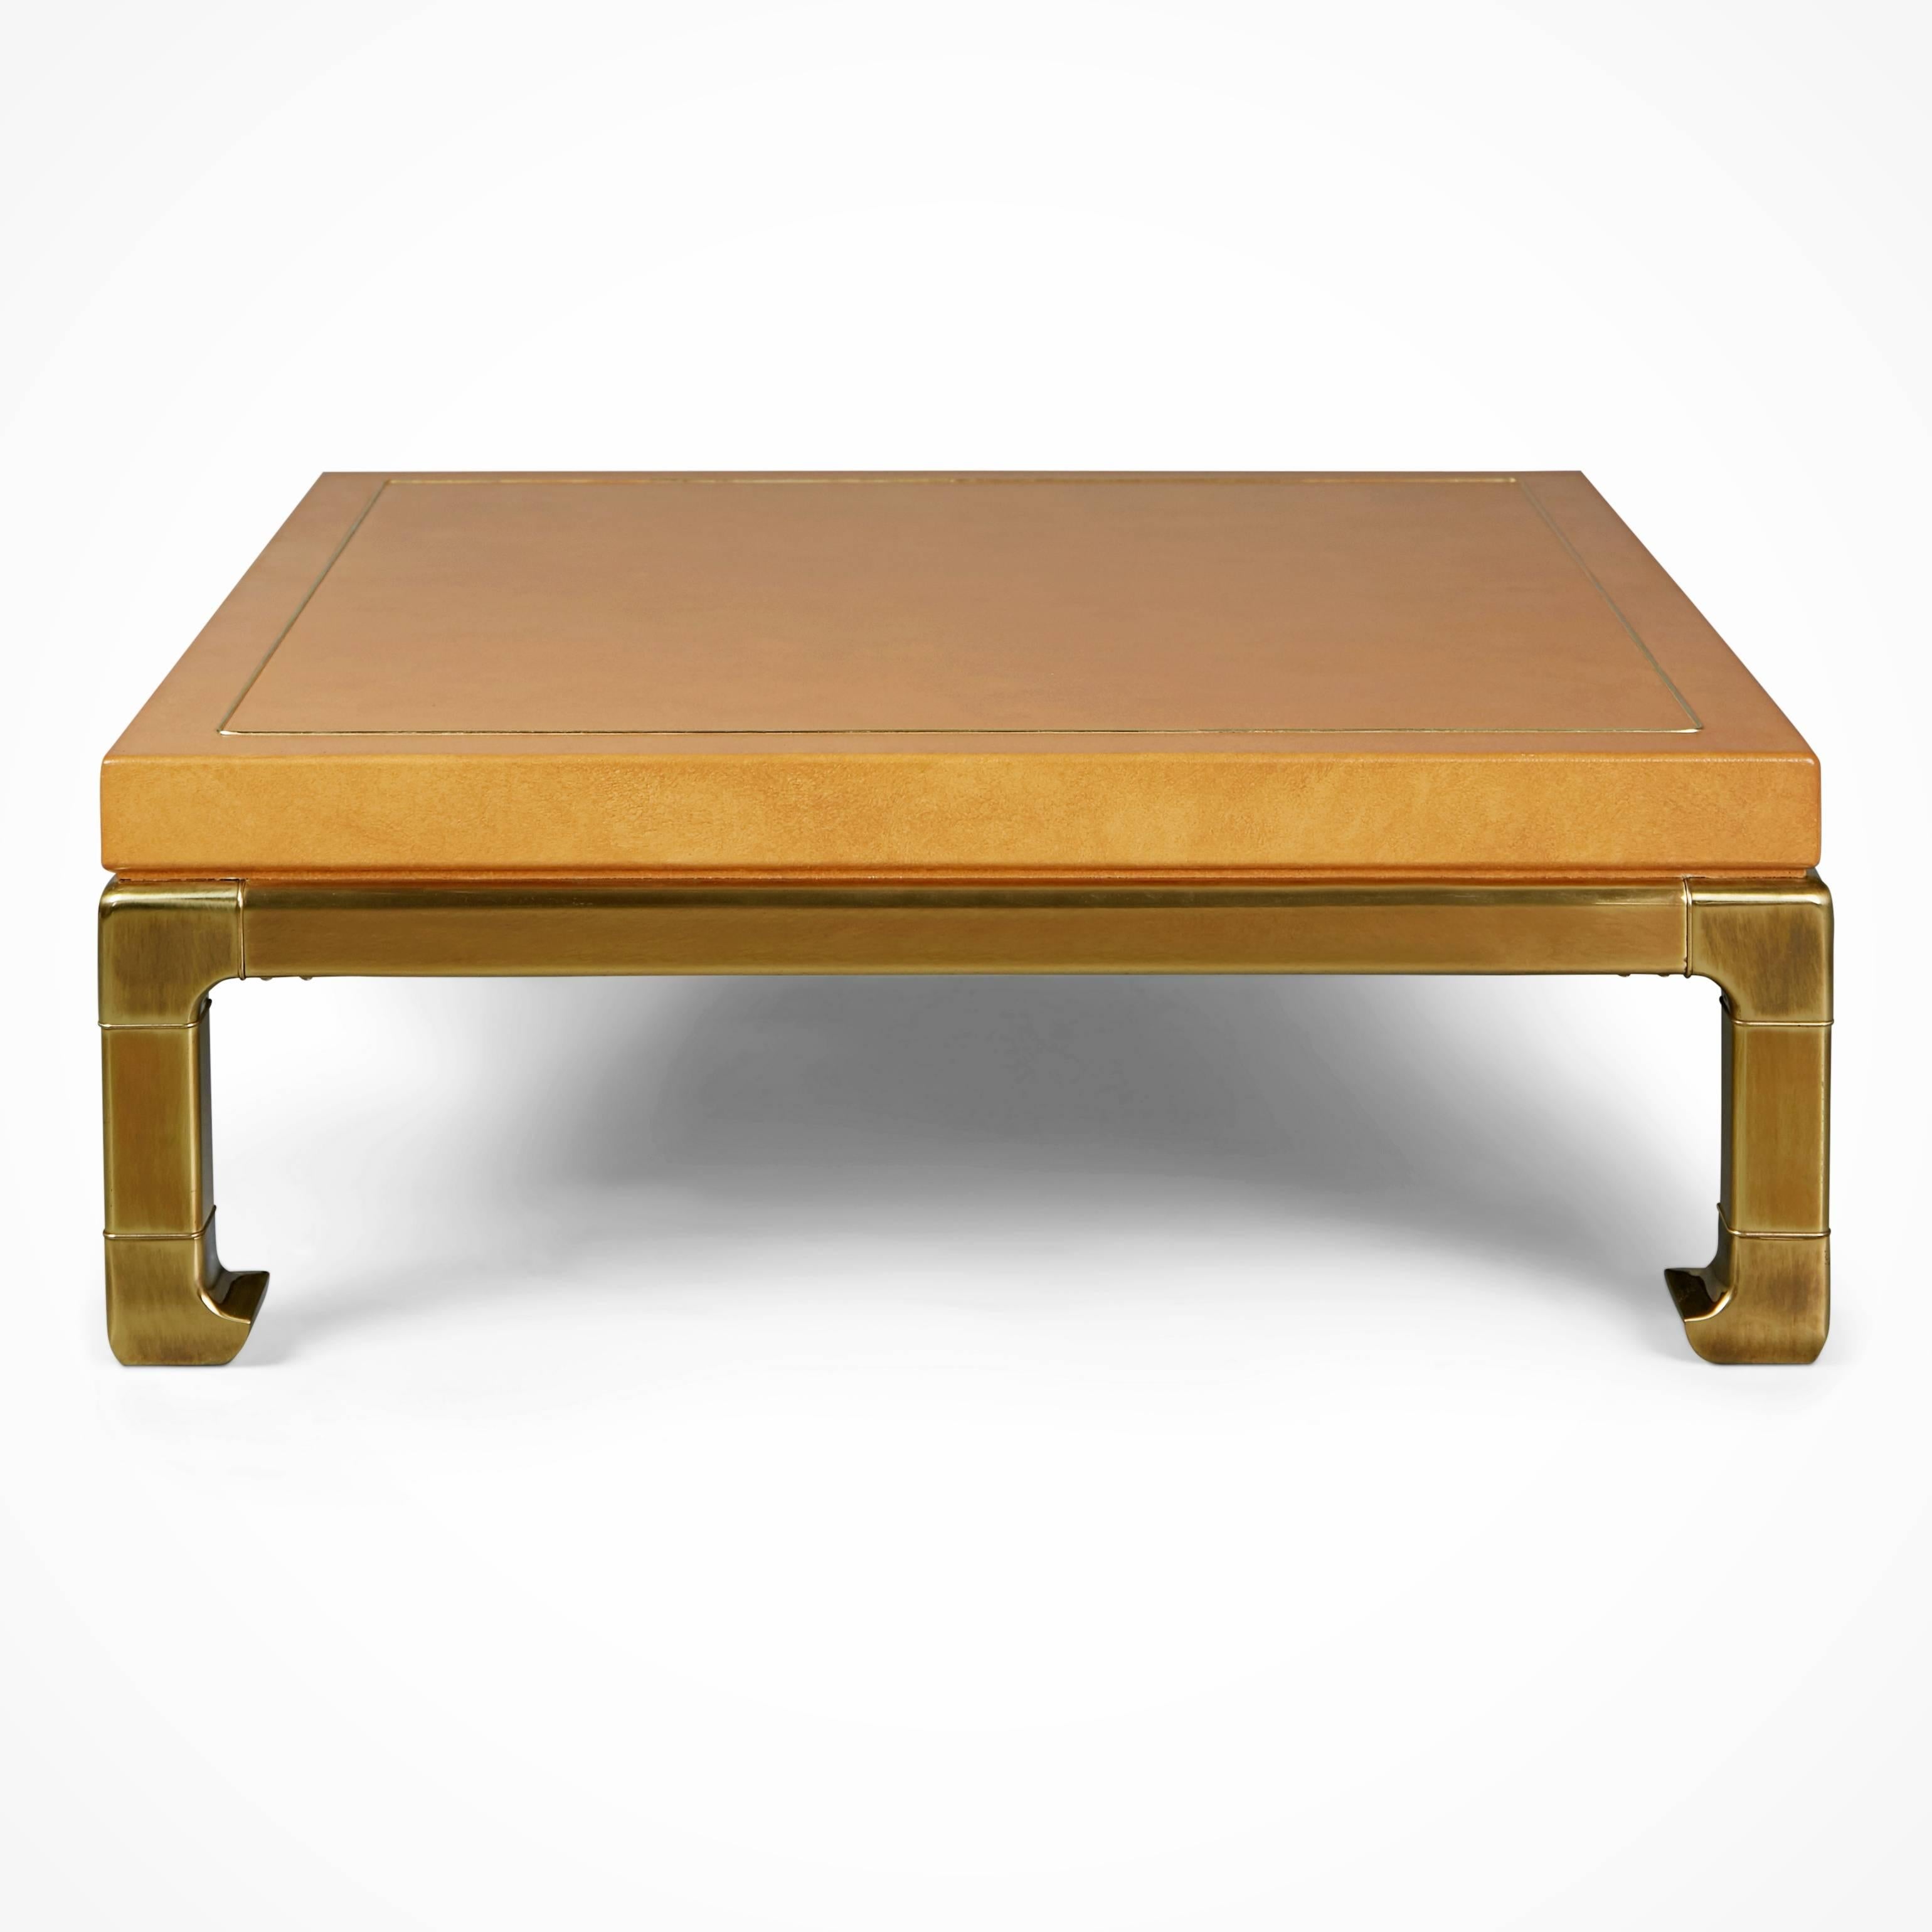 Exquisite custom ordered expansively proportioned square coffee table and rectangular side shaped side table from Mastercraft. These gorgeous pieces feature lacquered faux ostrich skin tops over wood with brass borders and luminescent on-trend heavy